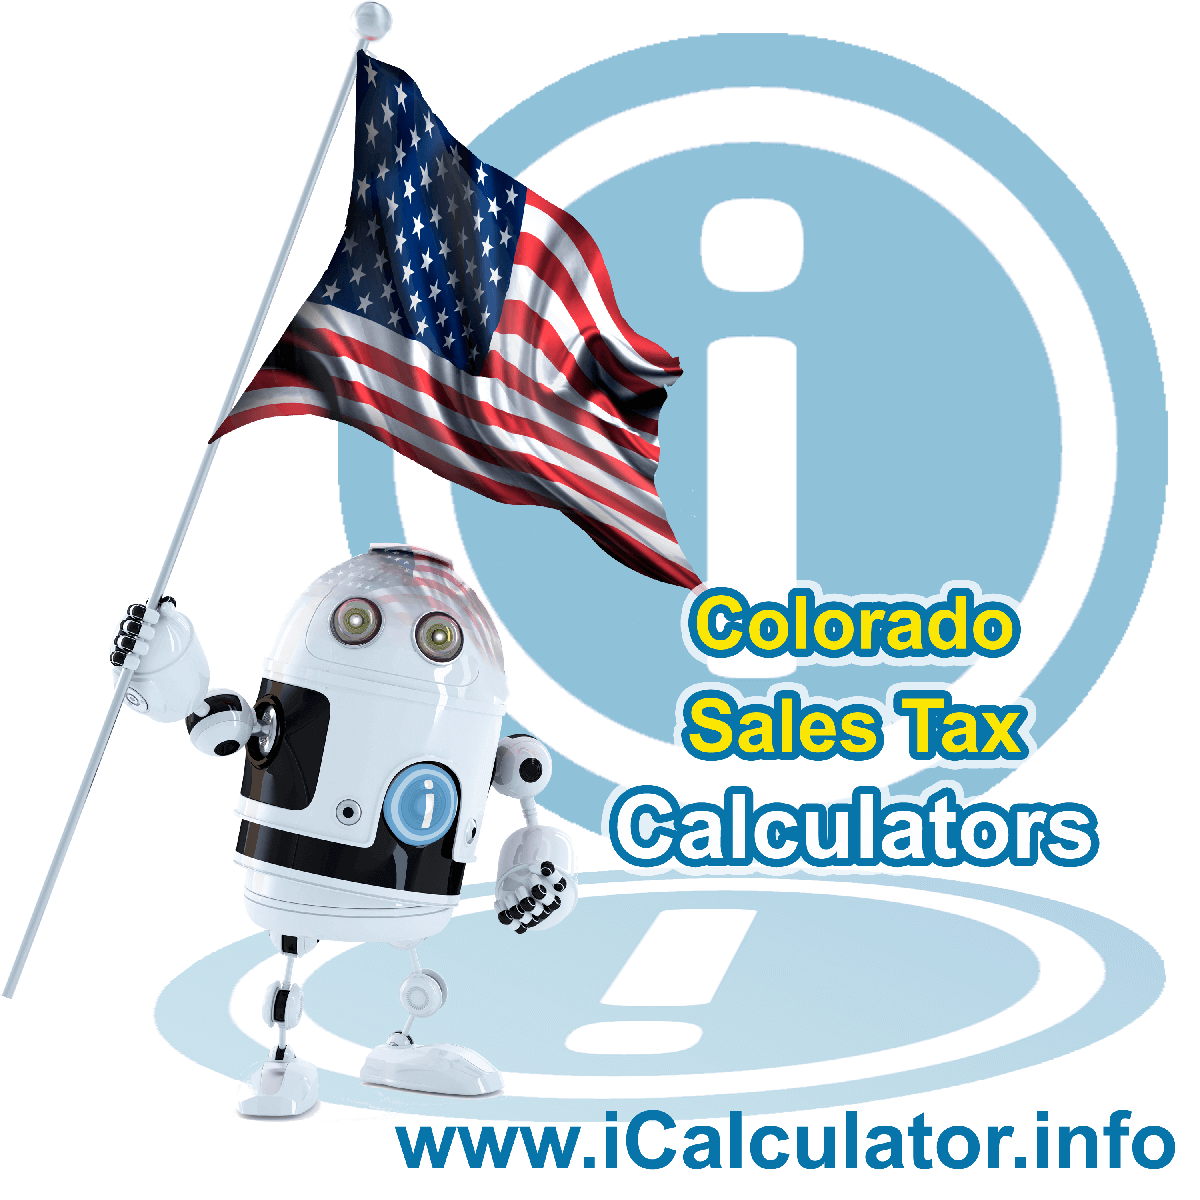 Silver Plume Sales Rates: This image illustrates a calculator robot calculating Silver Plume sales tax manually using the Silver Plume Sales Tax Formula. You can use this information to calculate Silver Plume Sales Tax manually or use the Silver Plume Sales Tax Calculator to calculate sales tax online.